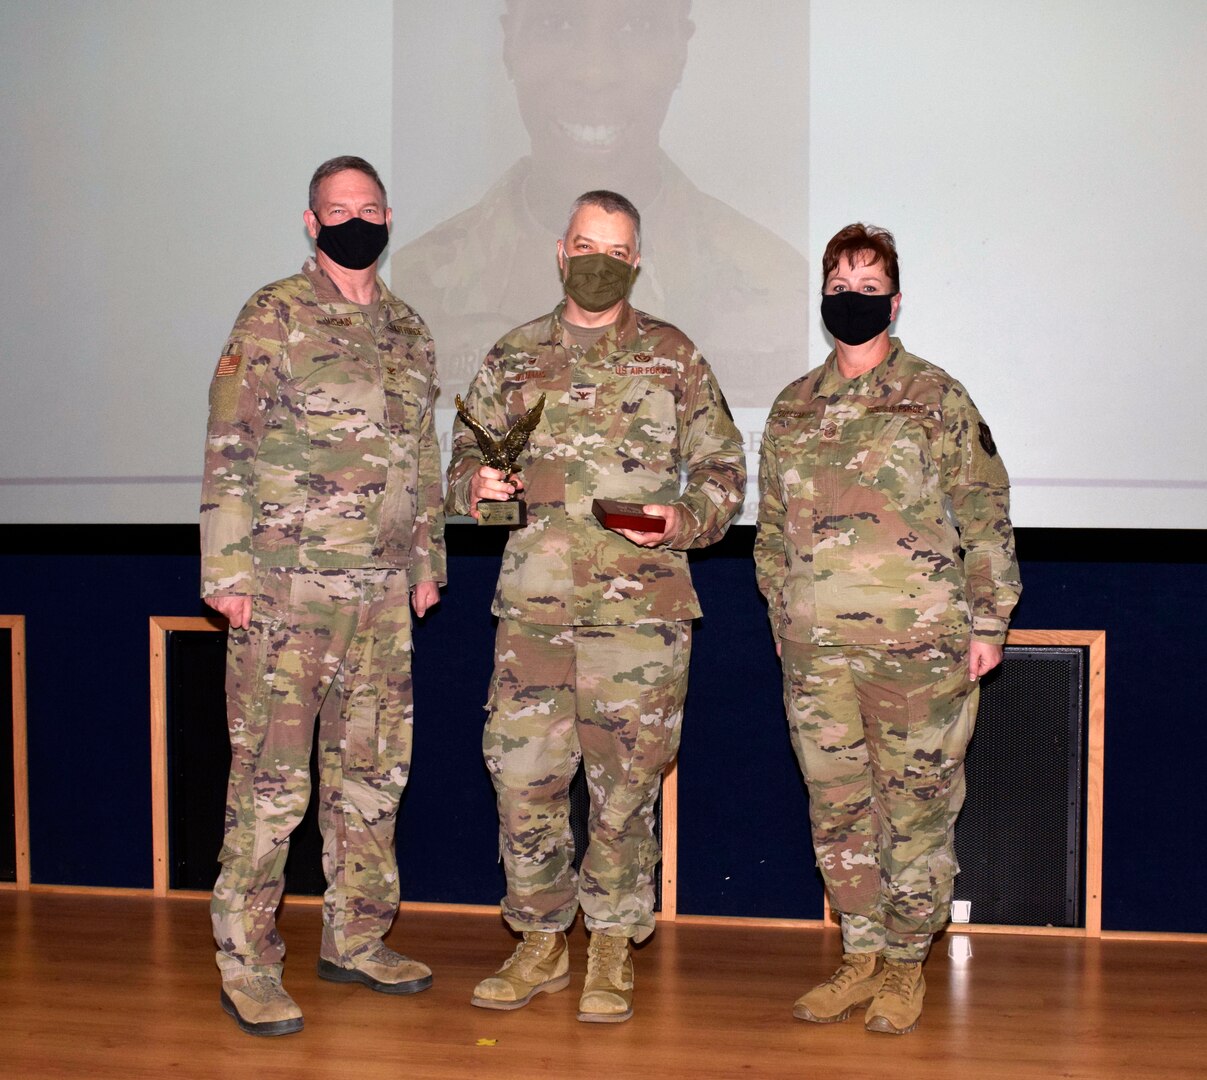 Col. Wayne M. Williams, 433rd Mission Support Group commander (center), accepts the field grade officer category award from Col. Terry W. McClain, 433rd Airlift Wing commander, and Chief Master Sgt. Shana C. Cullum, 433rd AW command chief, on behalf of the winner, Maj. Teanglia A. Moore, 74th Aerial Port Squadron, during the wing’s annual award recognition ceremony Jan. 30, 2021 at Joint Base San Antonio-Lackland, Texas. Moore was unable to attend the ceremony. (U.S. Air Force photo by Airman 1st Class Brittany K. Wich)